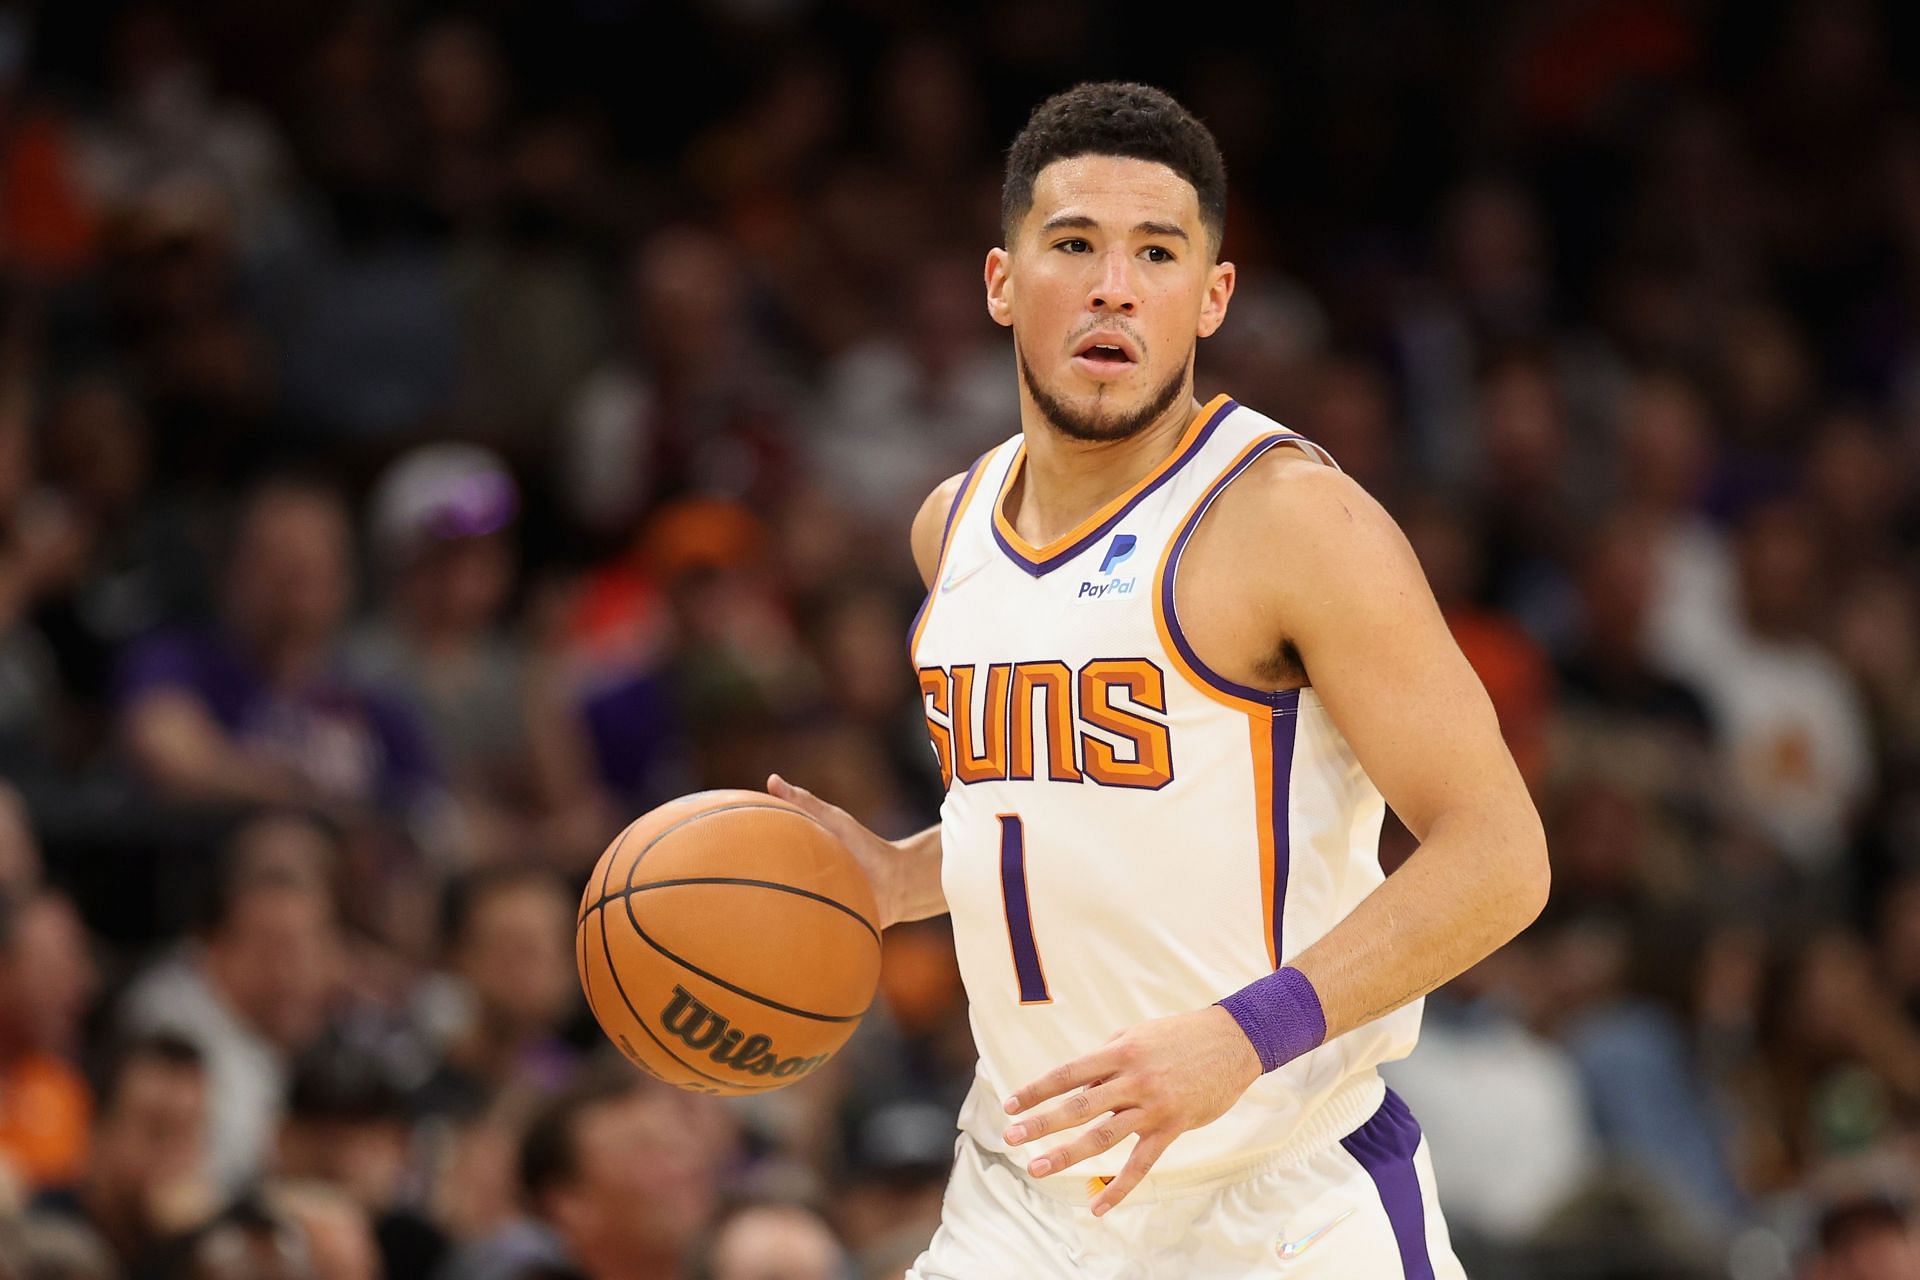 Phoenix Suns star Devin Booker has been impressive as of late